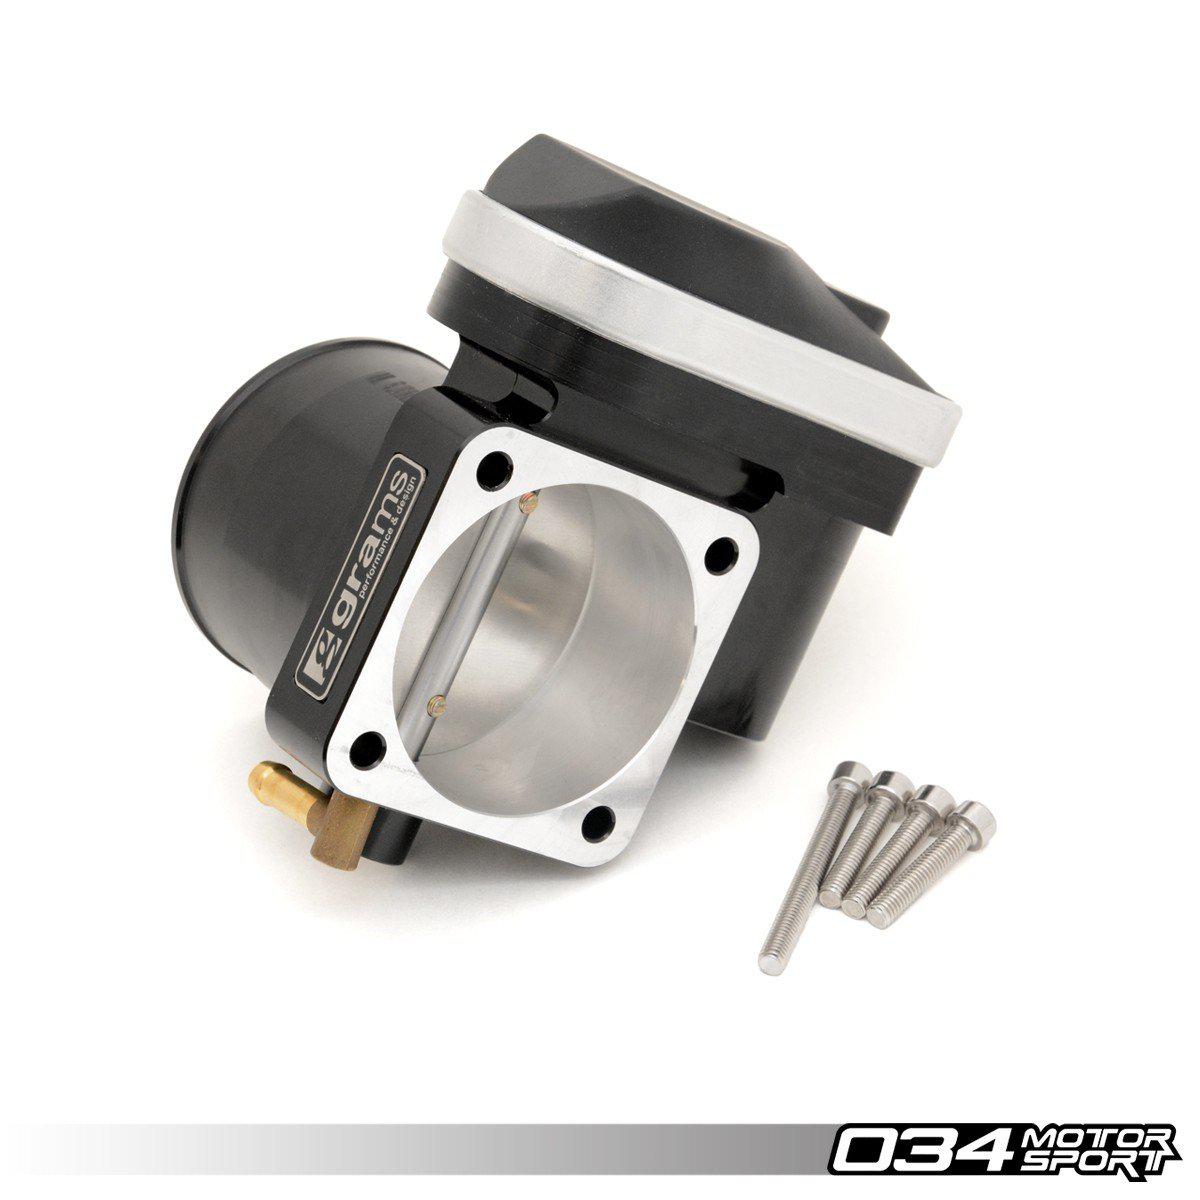 Grams Performance Drive-By-Wire Throttle Body For Transverse 1.8T, 70mm-A Little Tuning Co